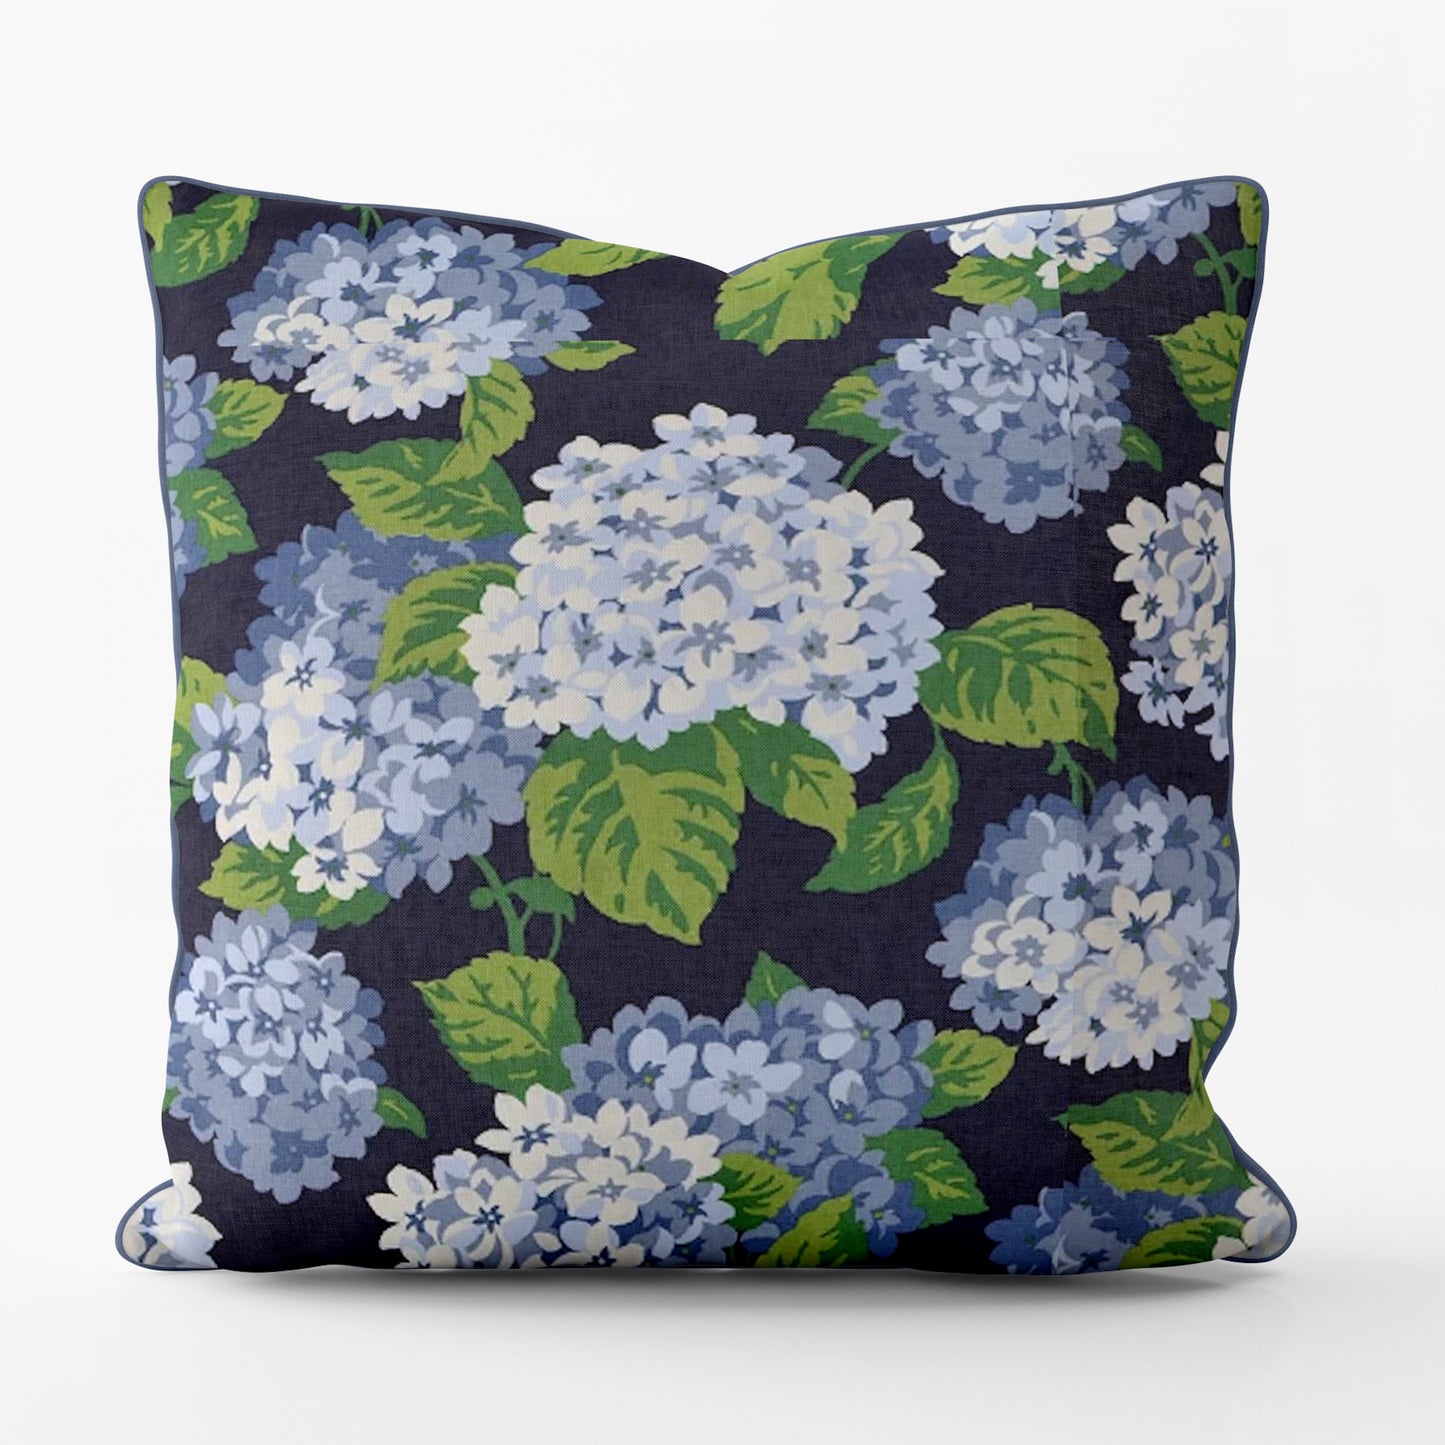 Decorative Pillows in Summerwind Navy Blue Hydrangea Floral, Large Scale